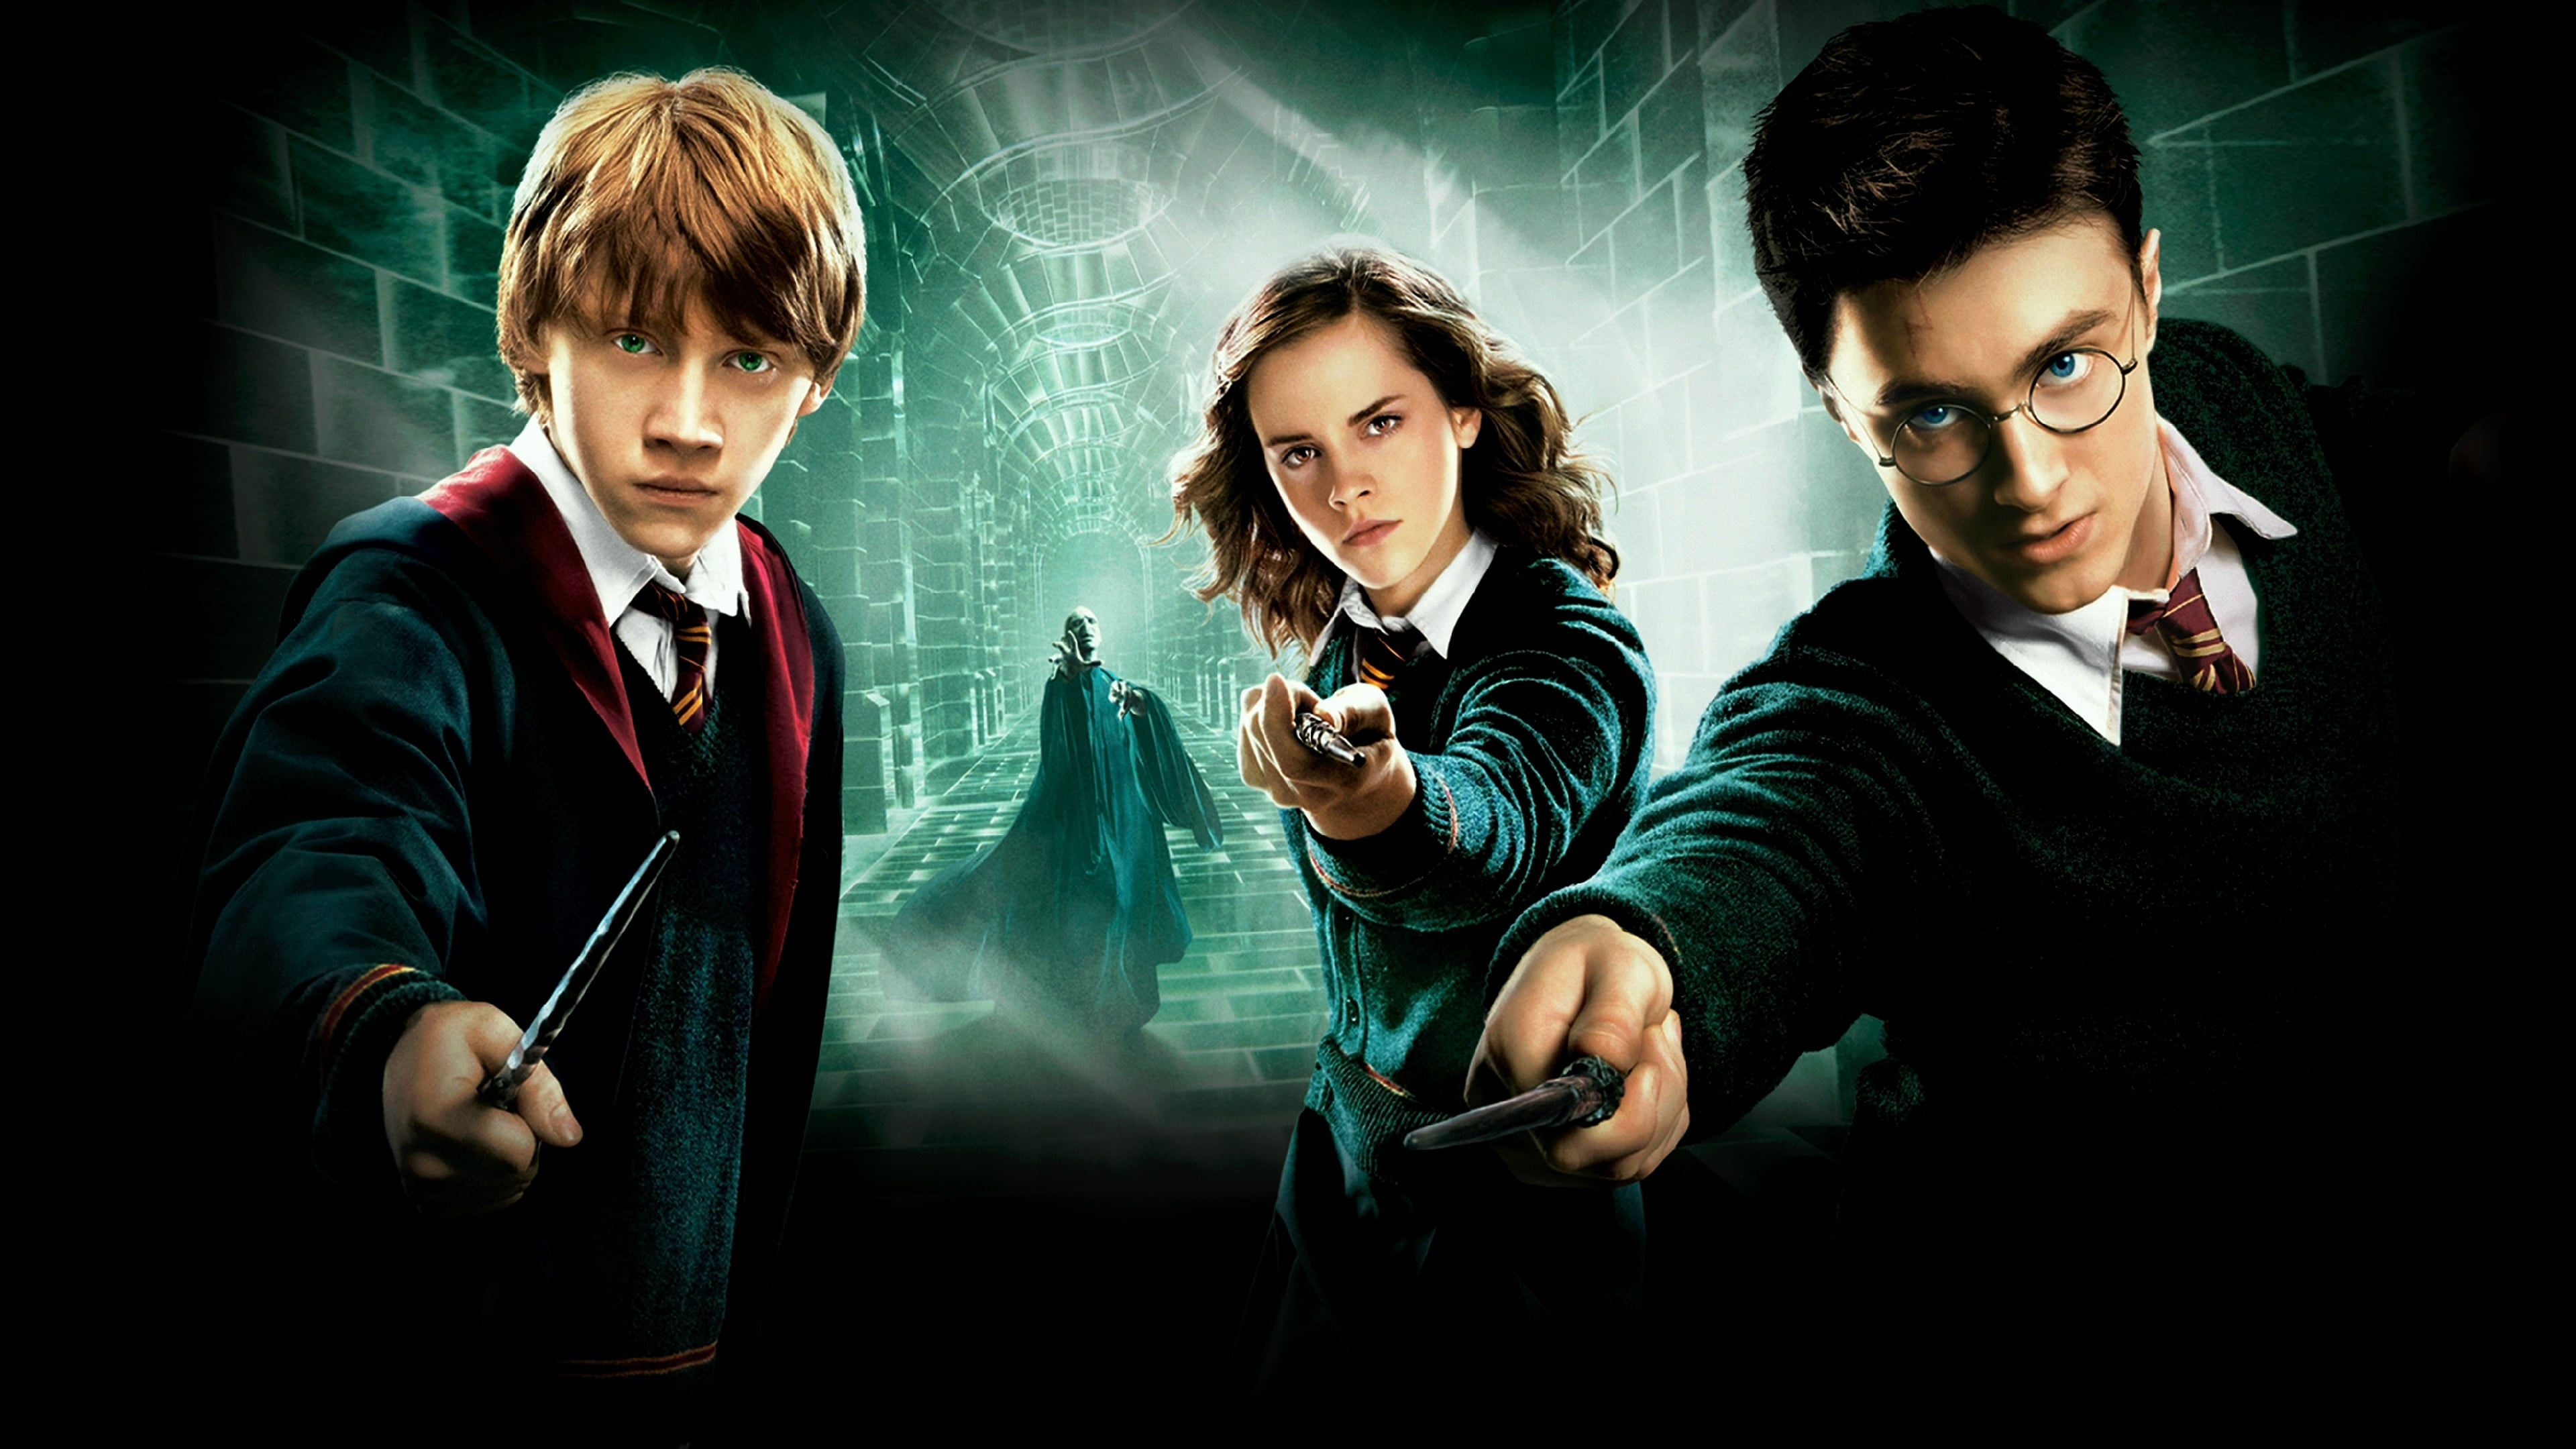 HD wallpaper, Emma Watson As Hermione Granger, Ron Weasley, Harry Potter And The Order Of The Phoenix, Daniel Radcliffe As Harry Potter